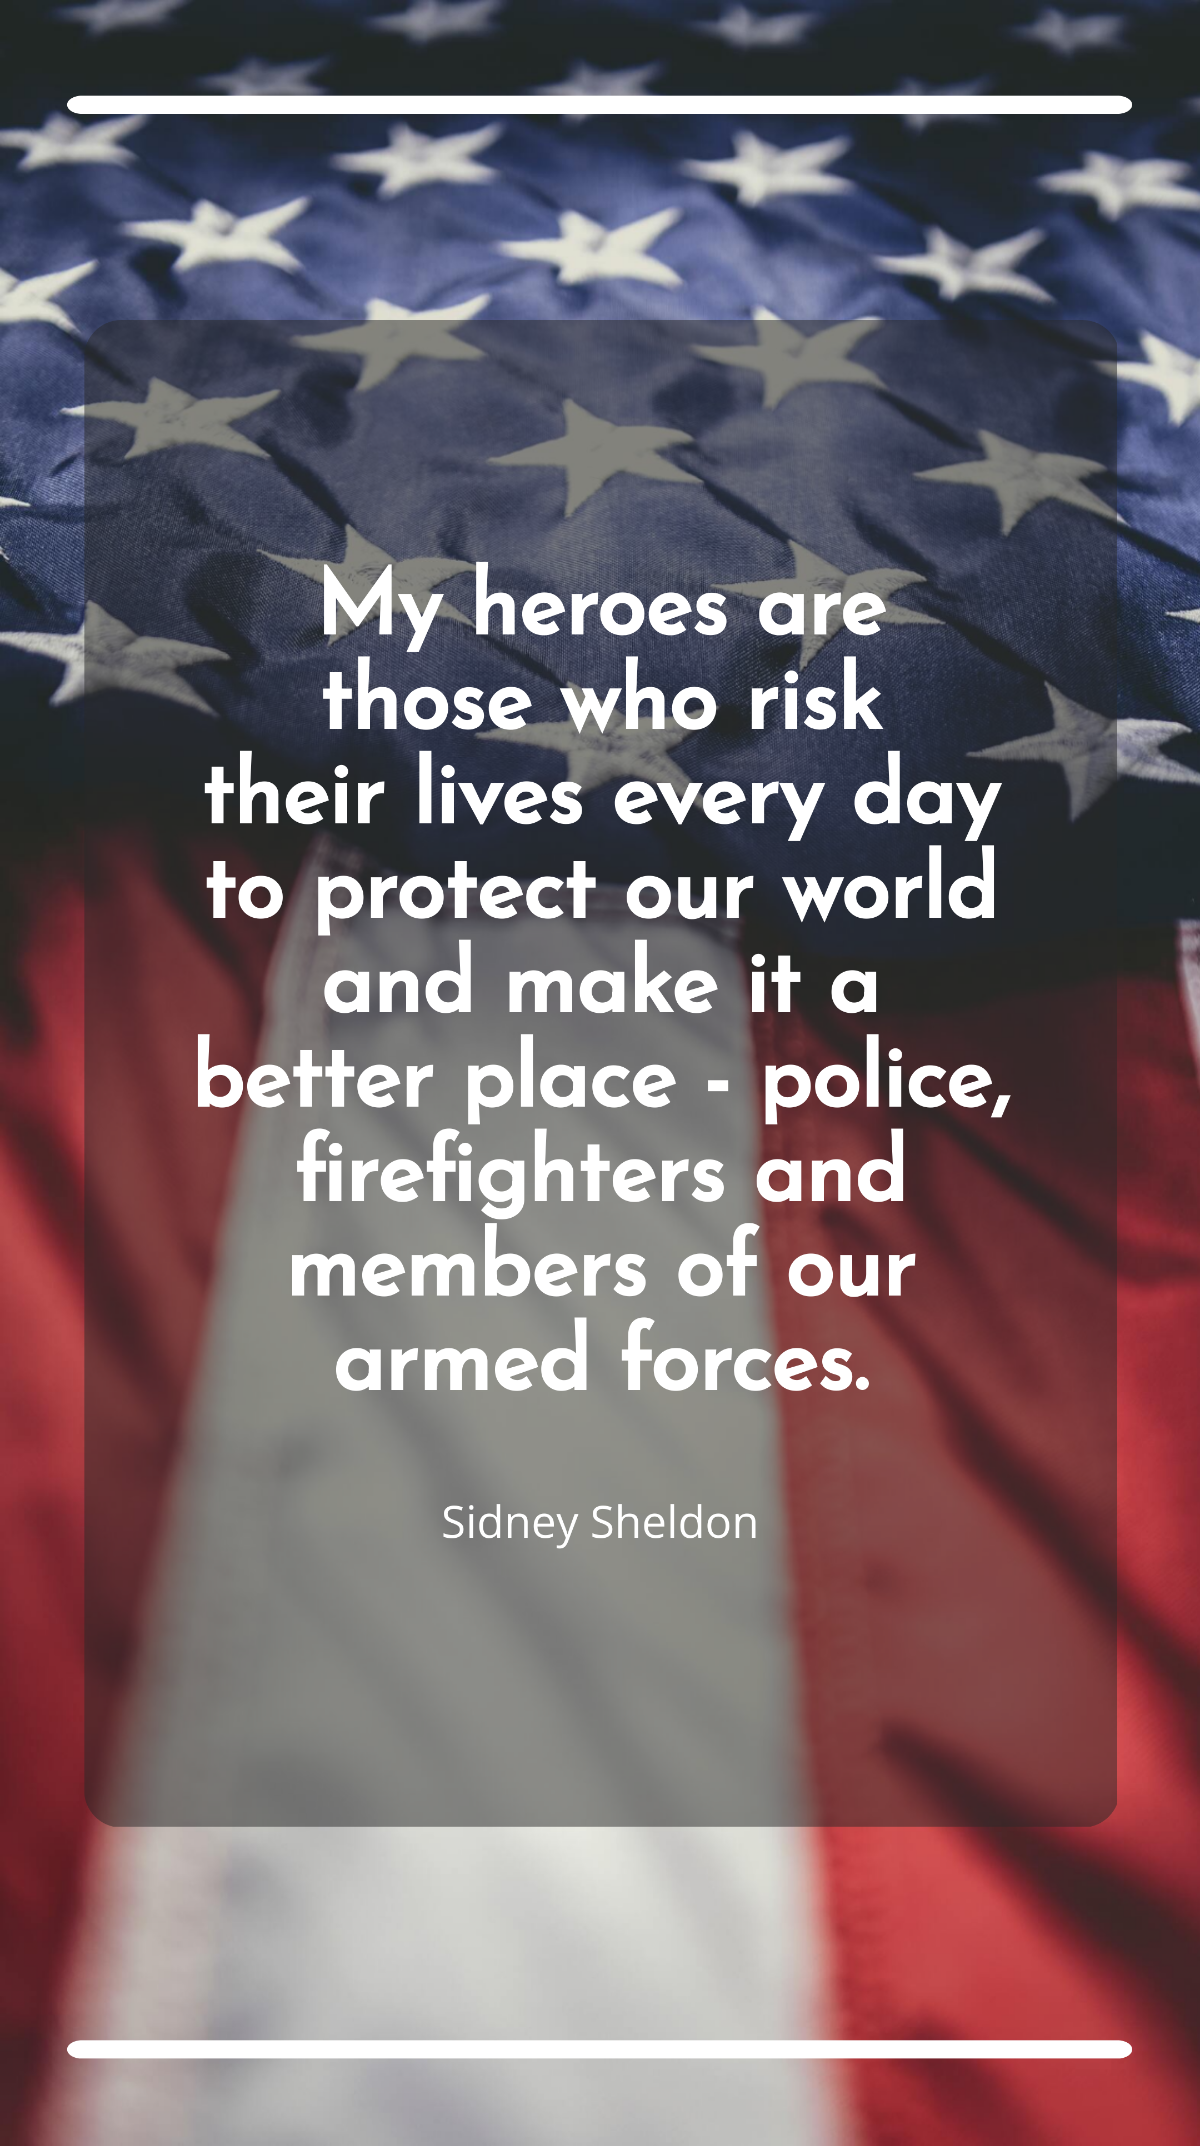 Free Sidney Sheldon - My heroes are those who risk their lives every day to protect our world and make it a better place - police, firefighters and members of our armed forces. Template